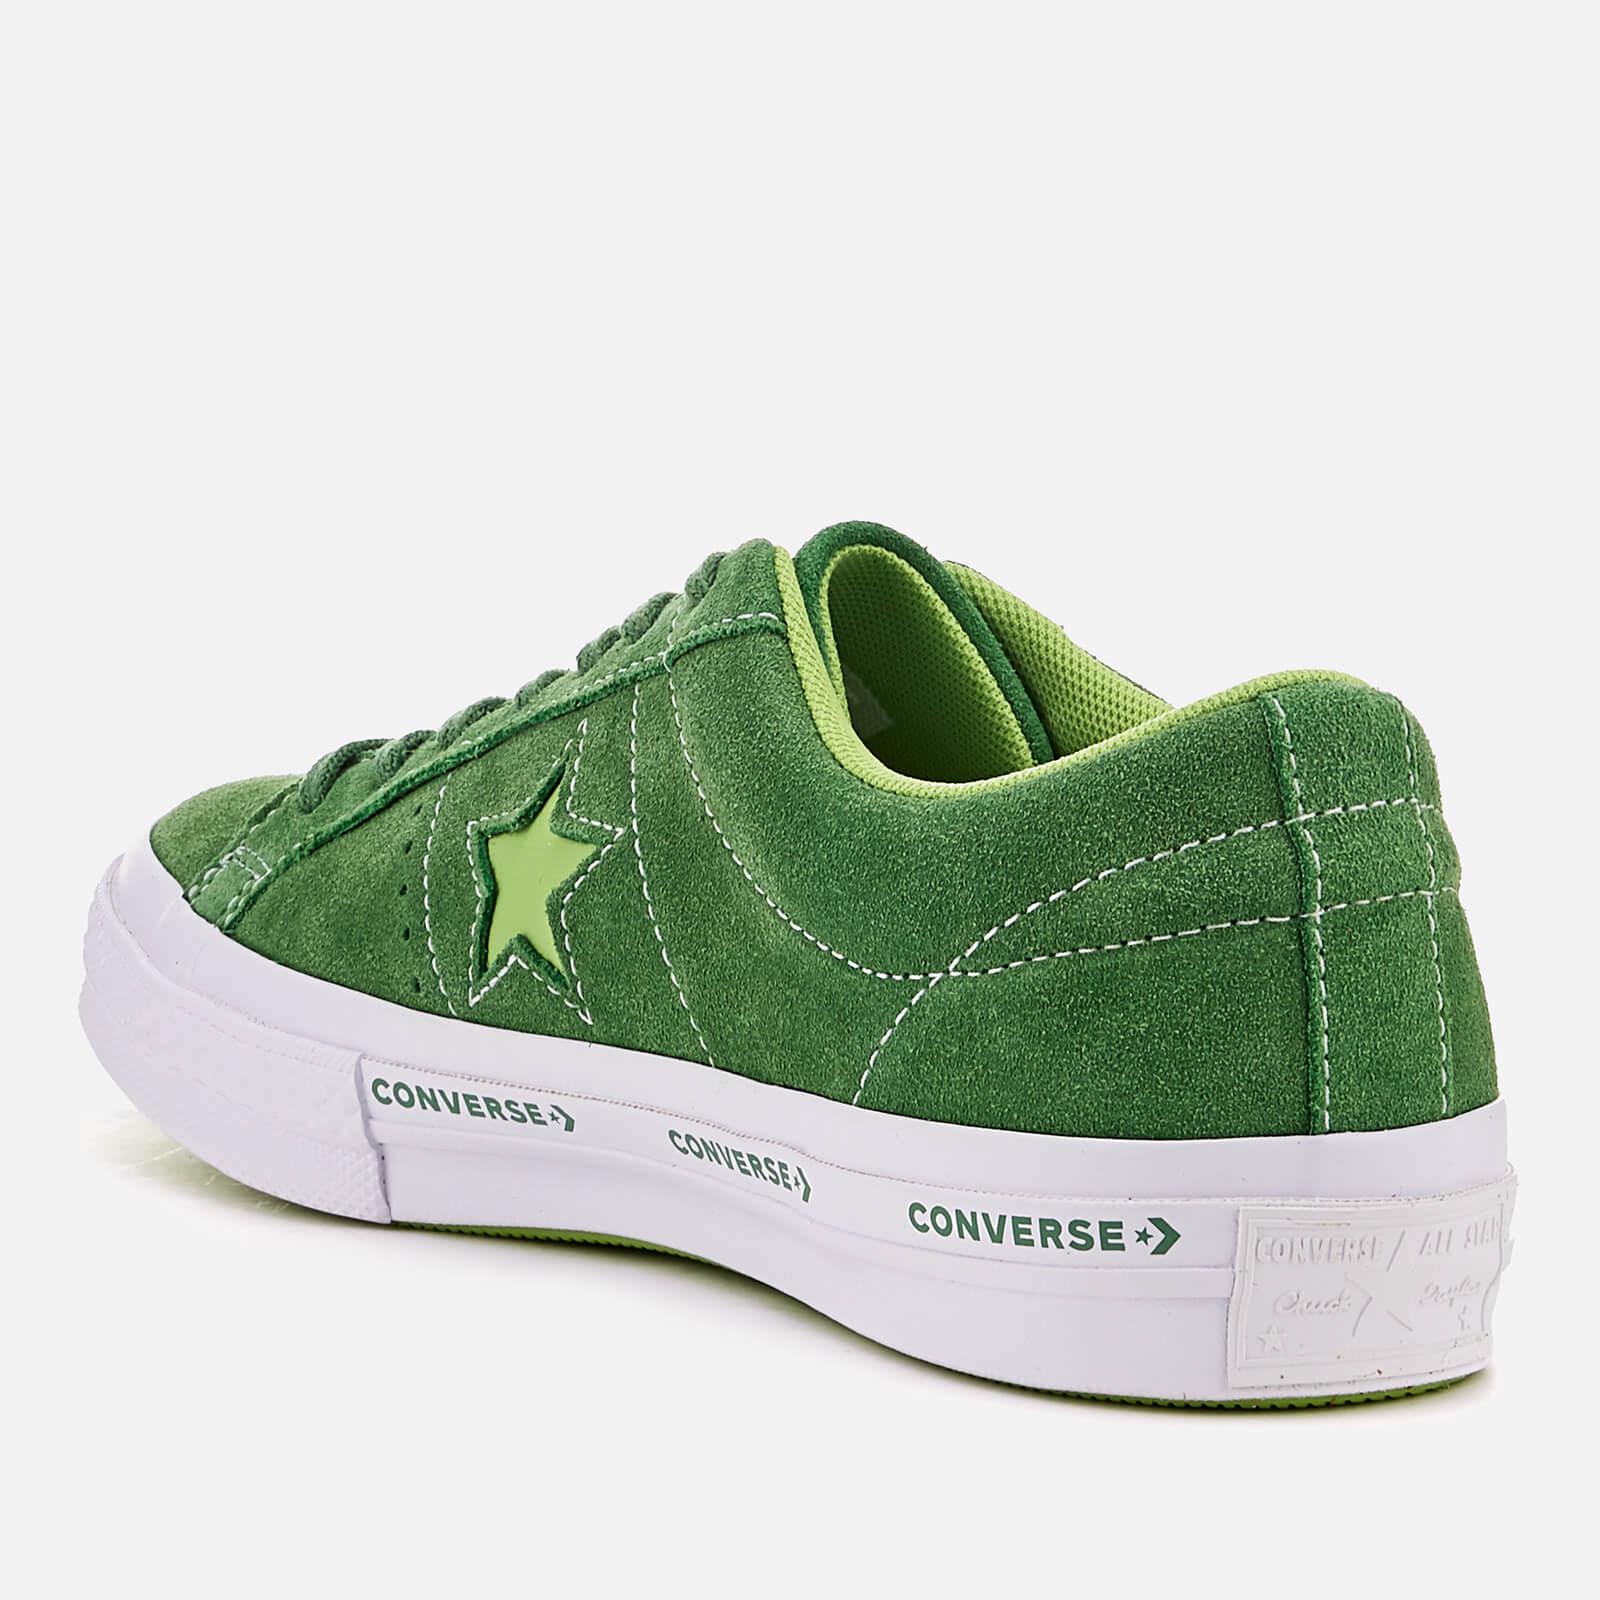 Converse Leather One Star Ox Trainers in Mint Green/Jade Lime/White (Green)  for Men - Lyst